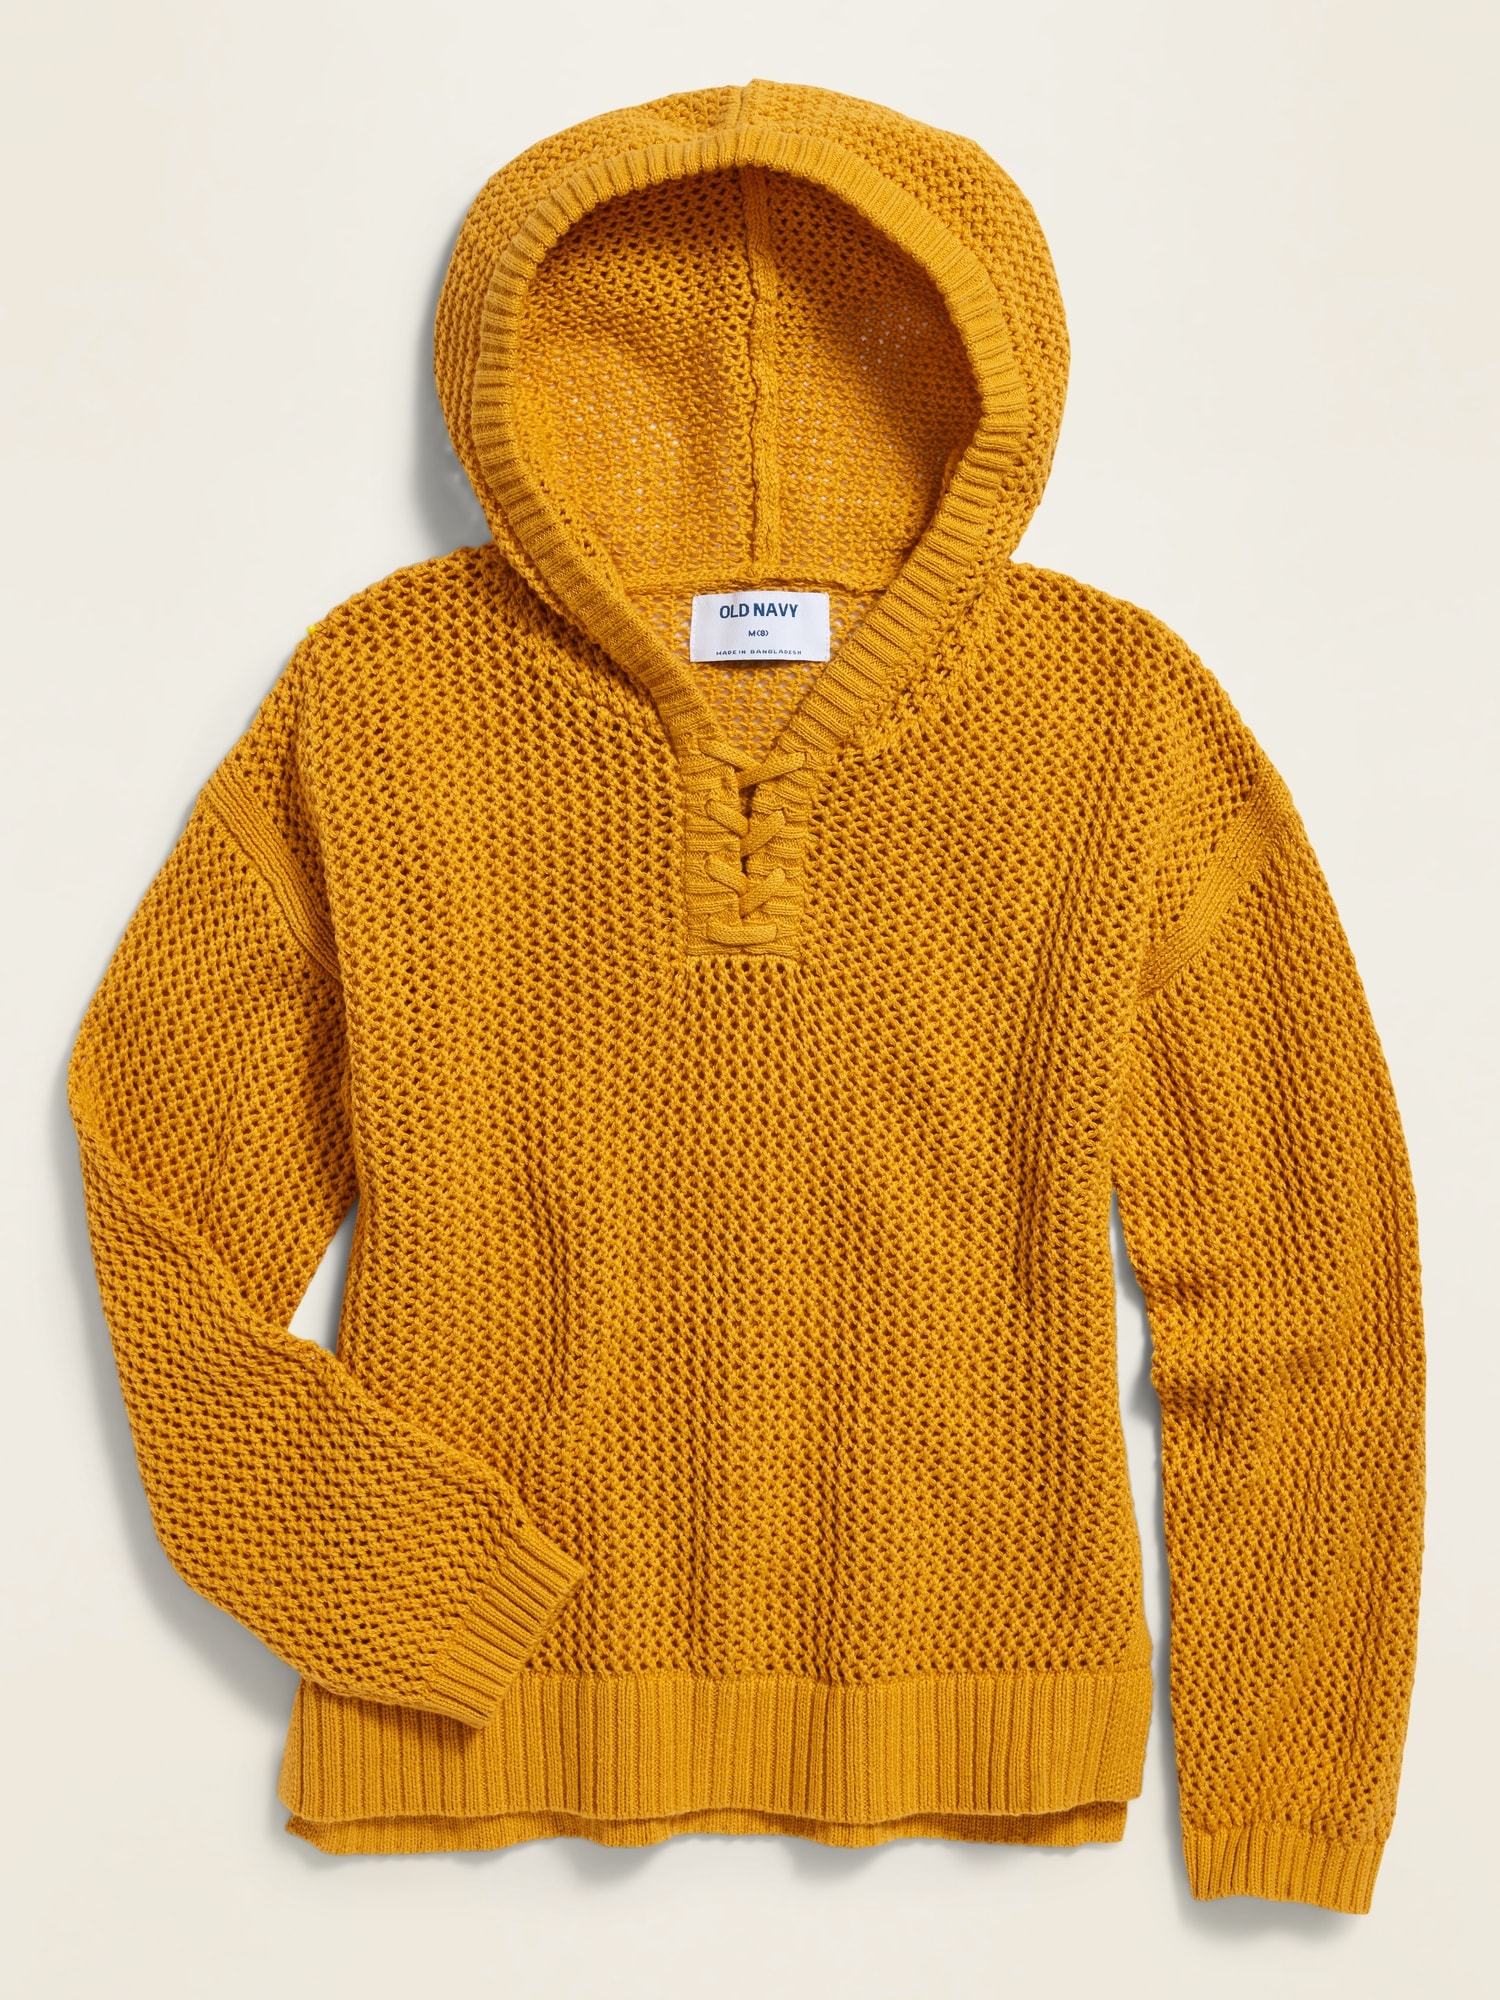 yellow hoodie old navy